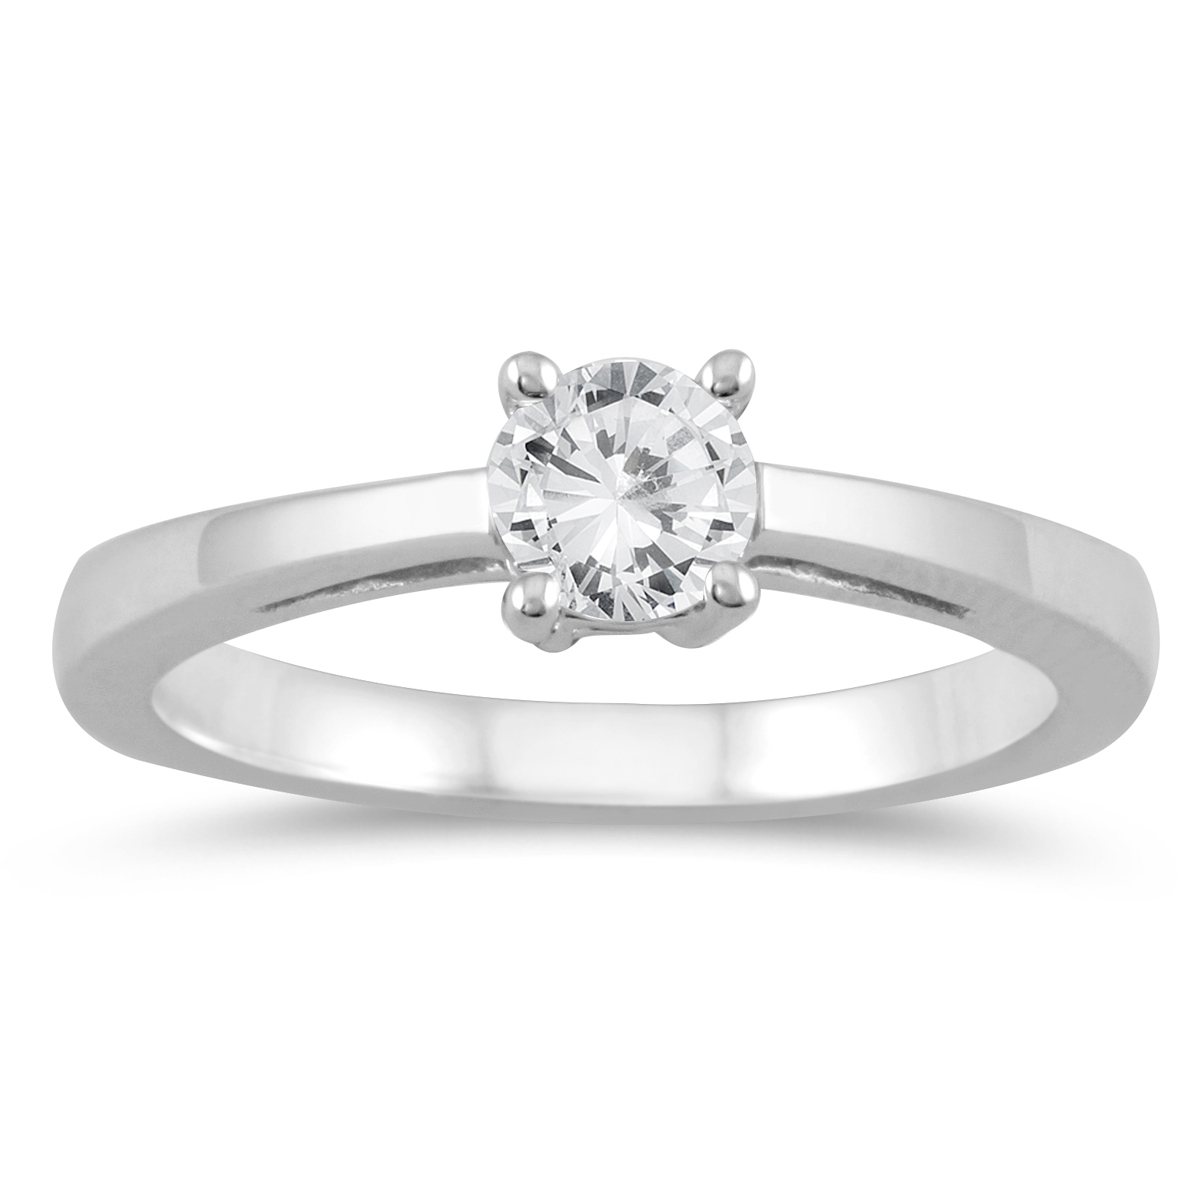 1/2 Carat Classic Diamond Solitaire Ring in 10K White Gold